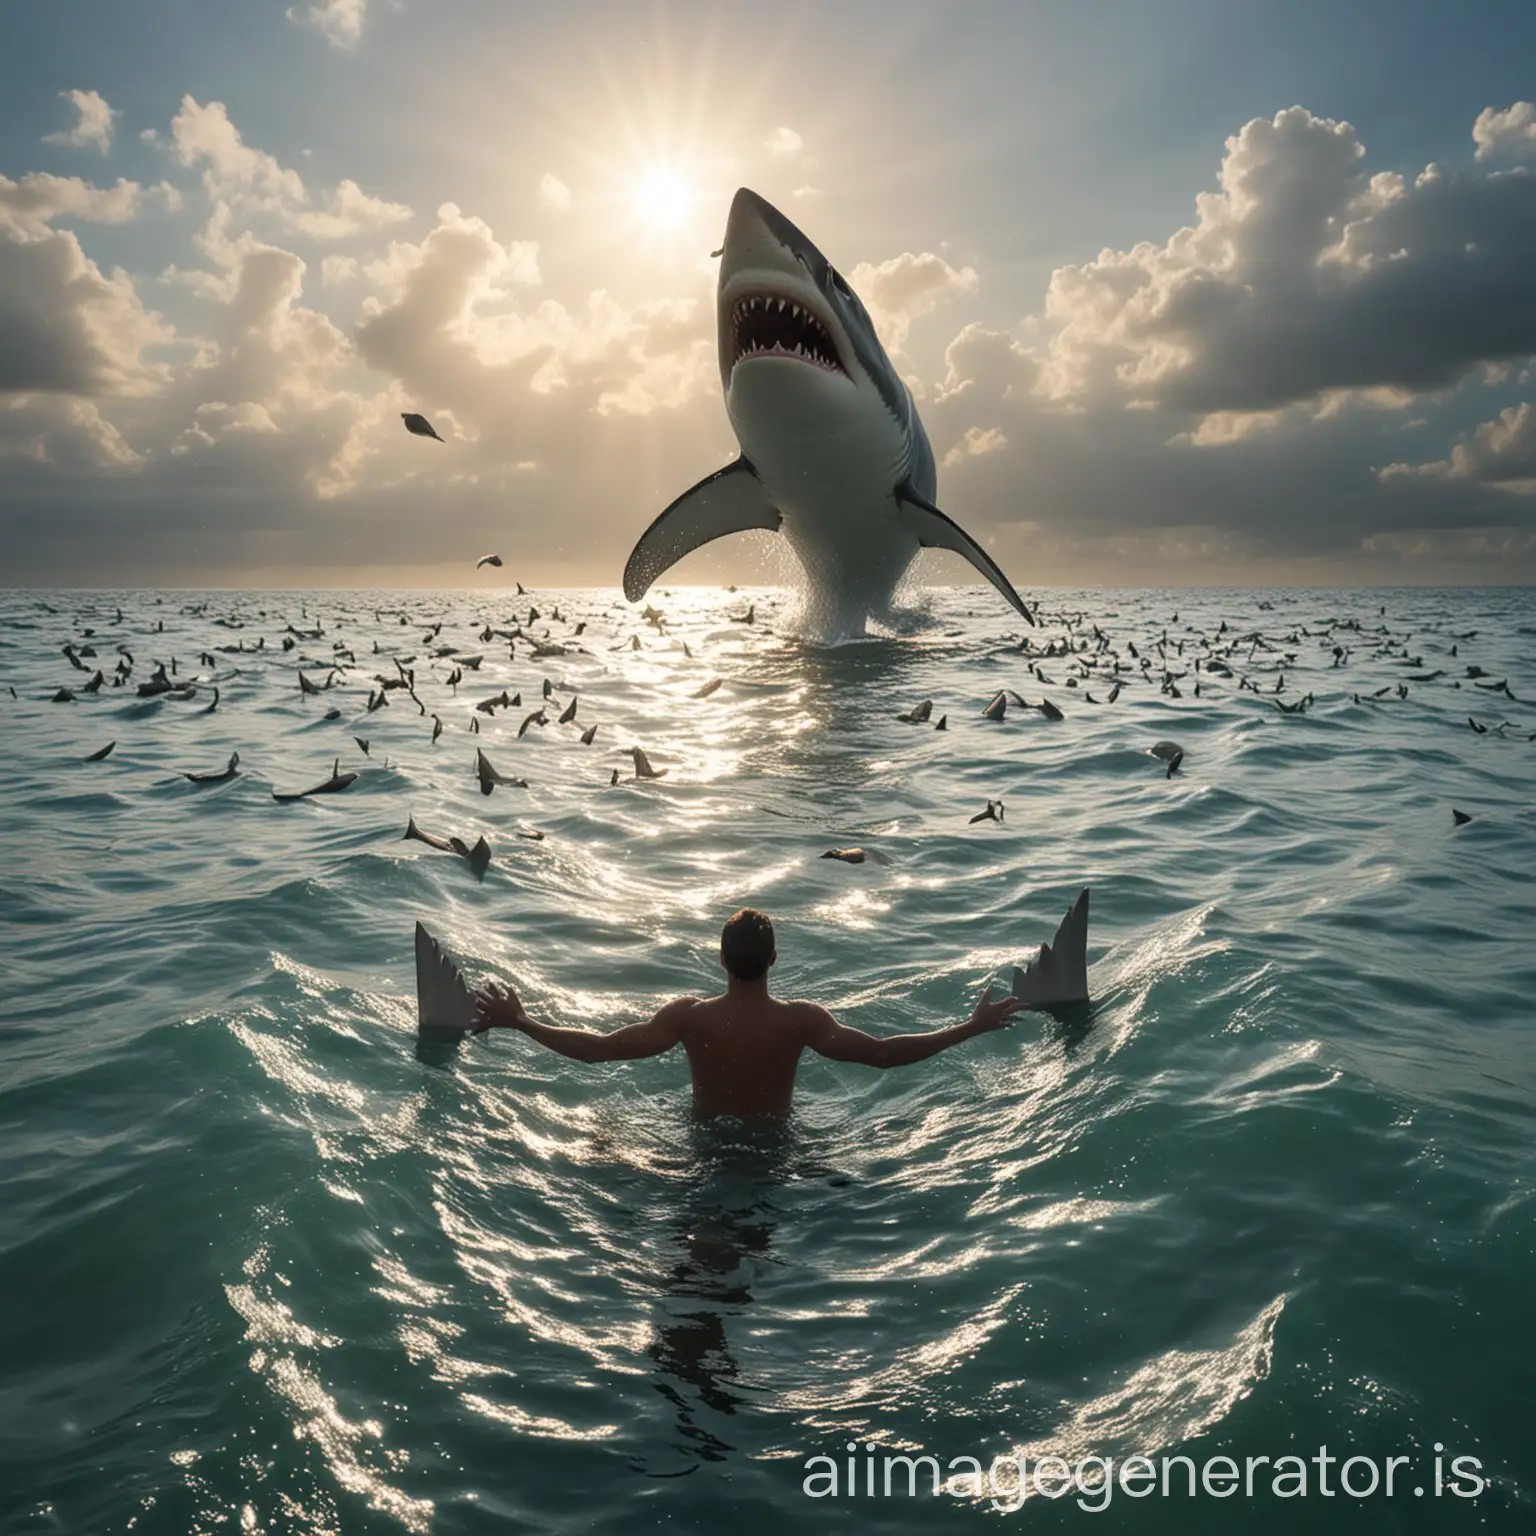 Happy-Man-Surrounded-by-Emerging-Shark-Fins-in-Vibrant-Sea-Scene